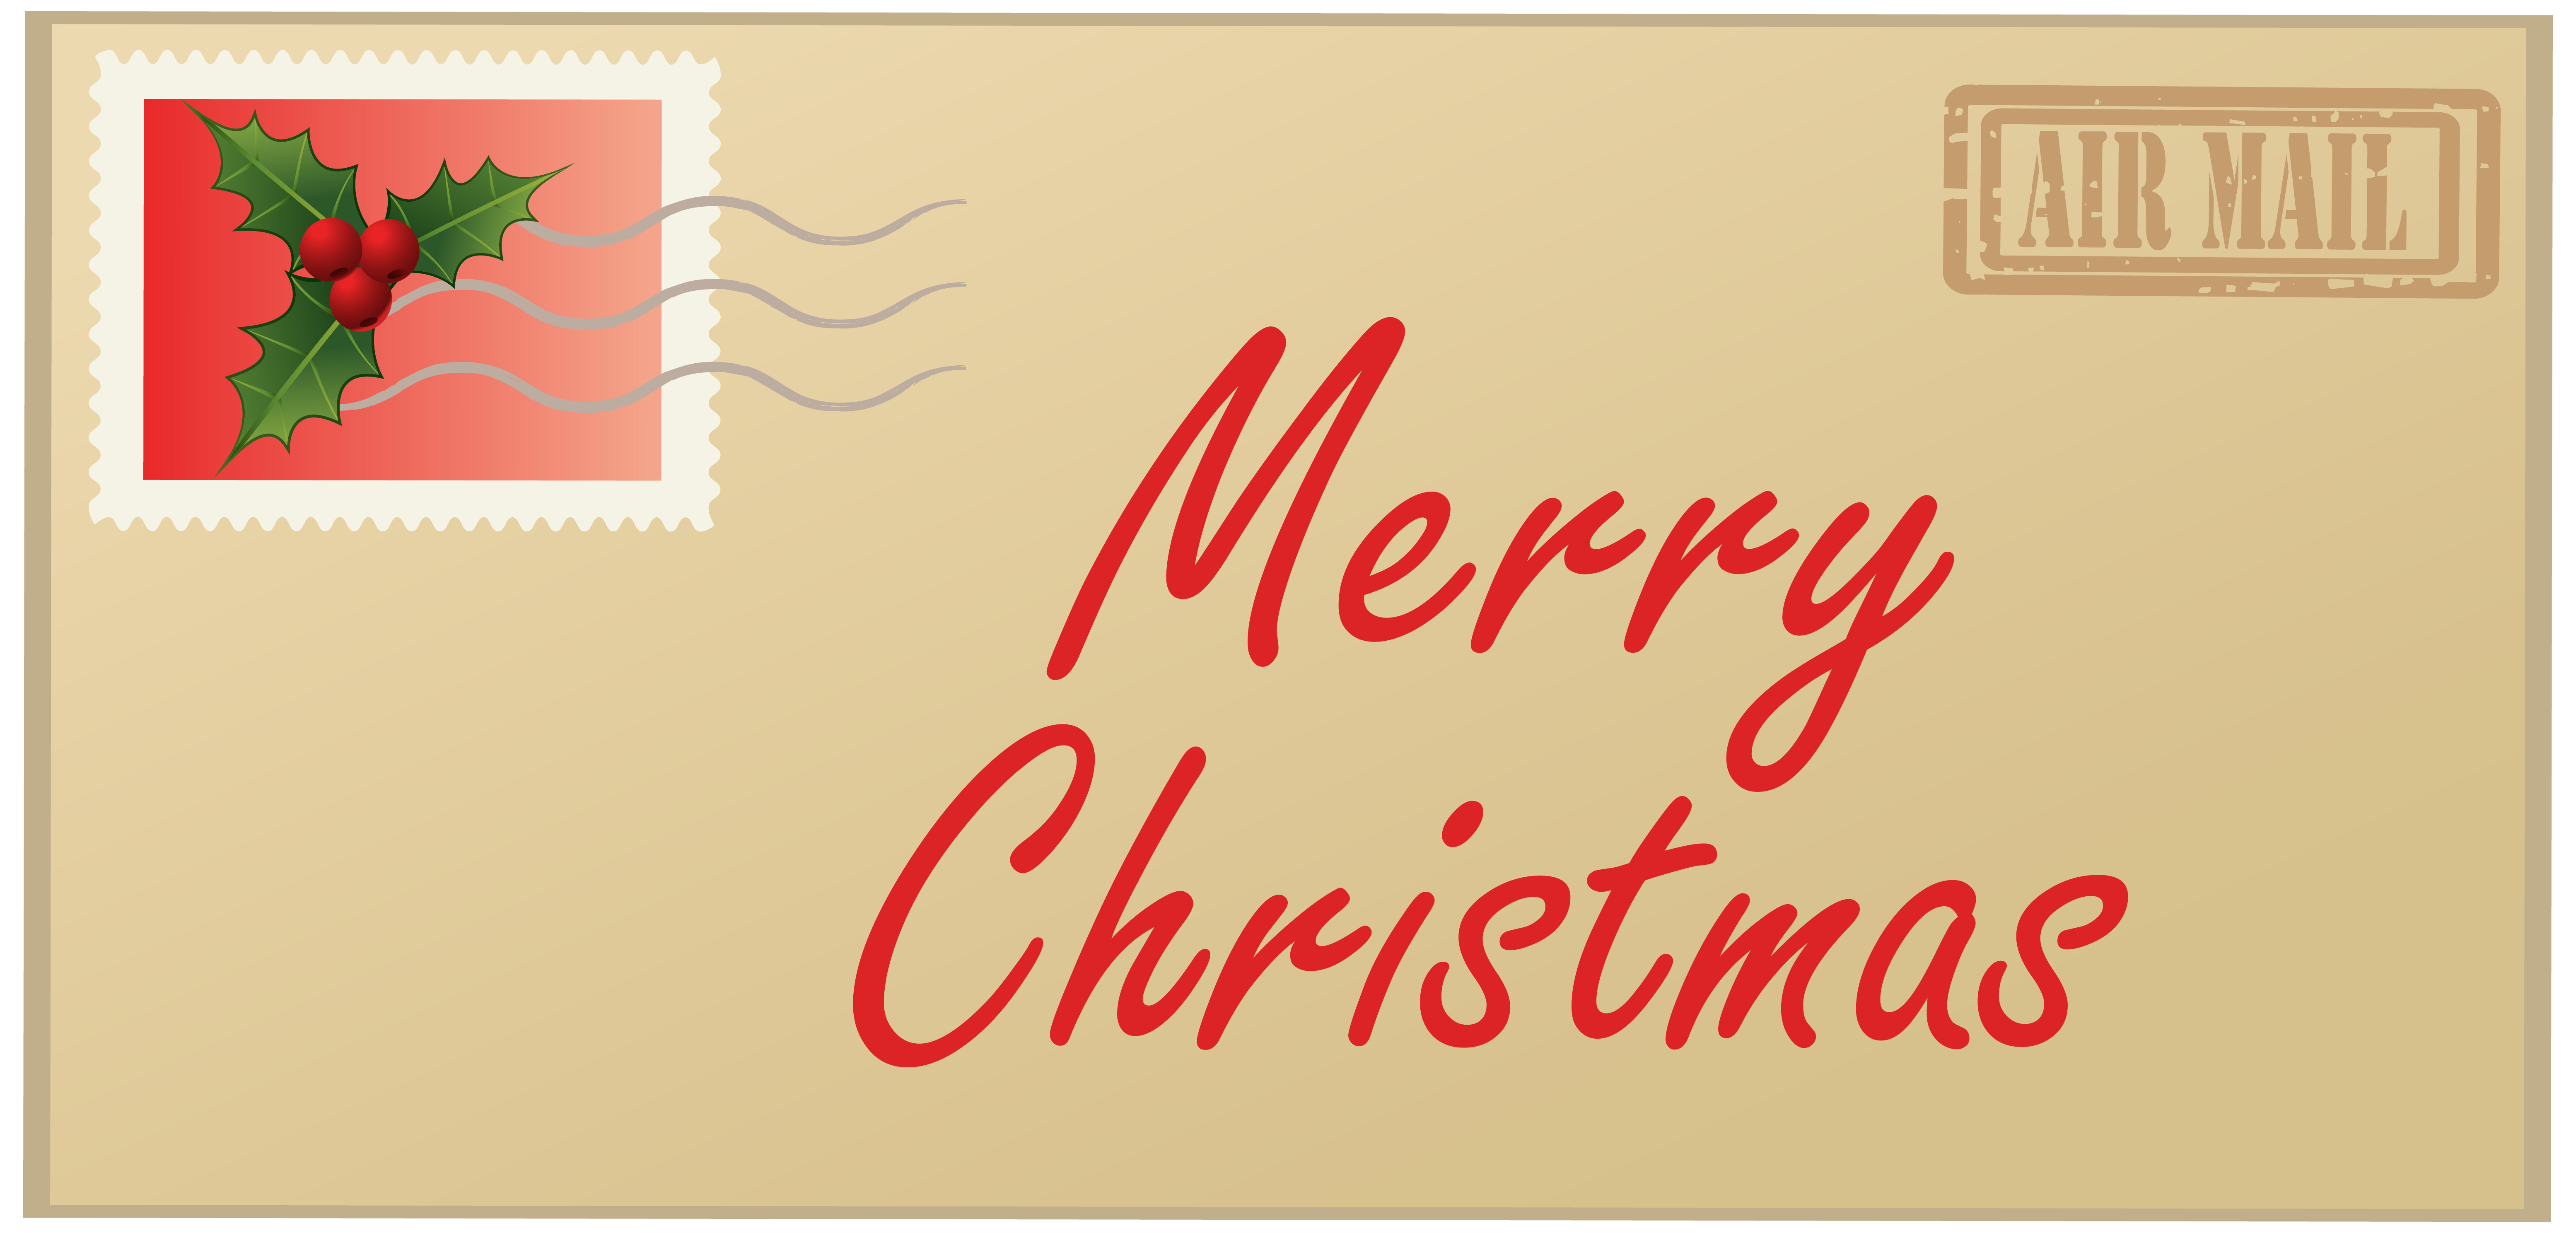 Merry Christmas Letter PNG Clipart Image Quality Image And Transparent PNG Free Clipart